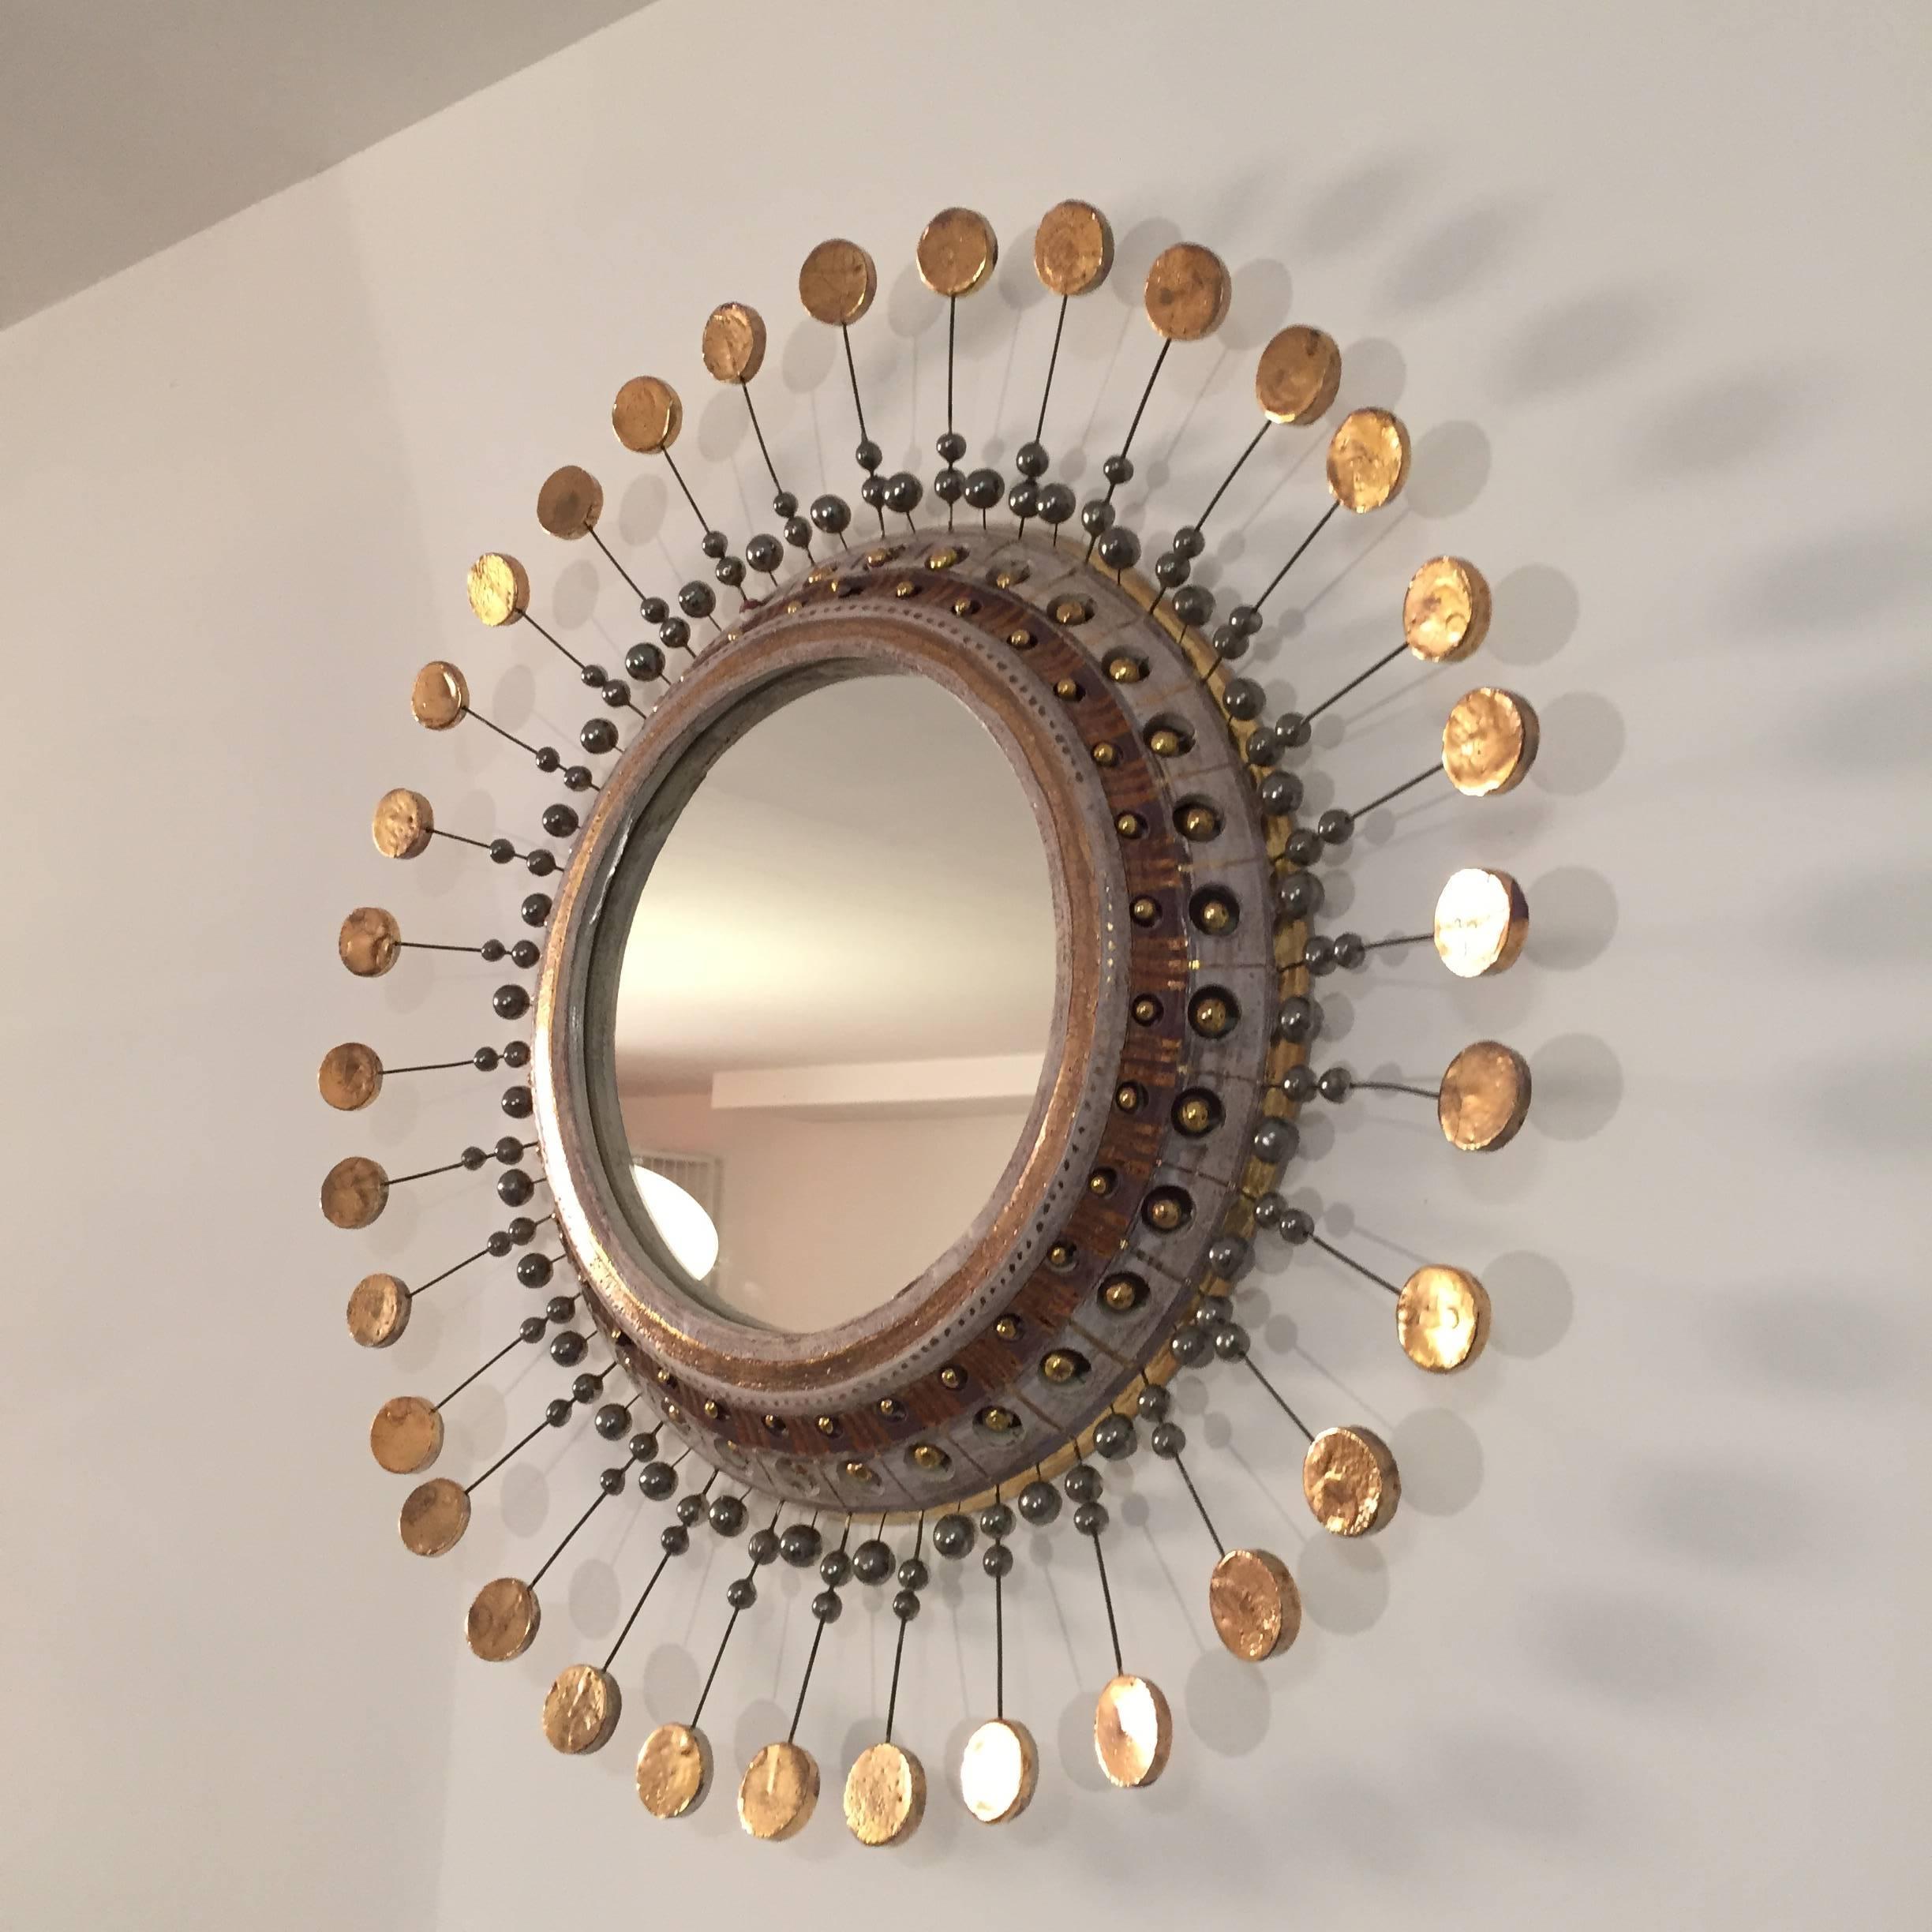 Beautiful sunburst mirror by Georges Pelletier in glazed ceramic.
Gold and silver details,
circa 1960.